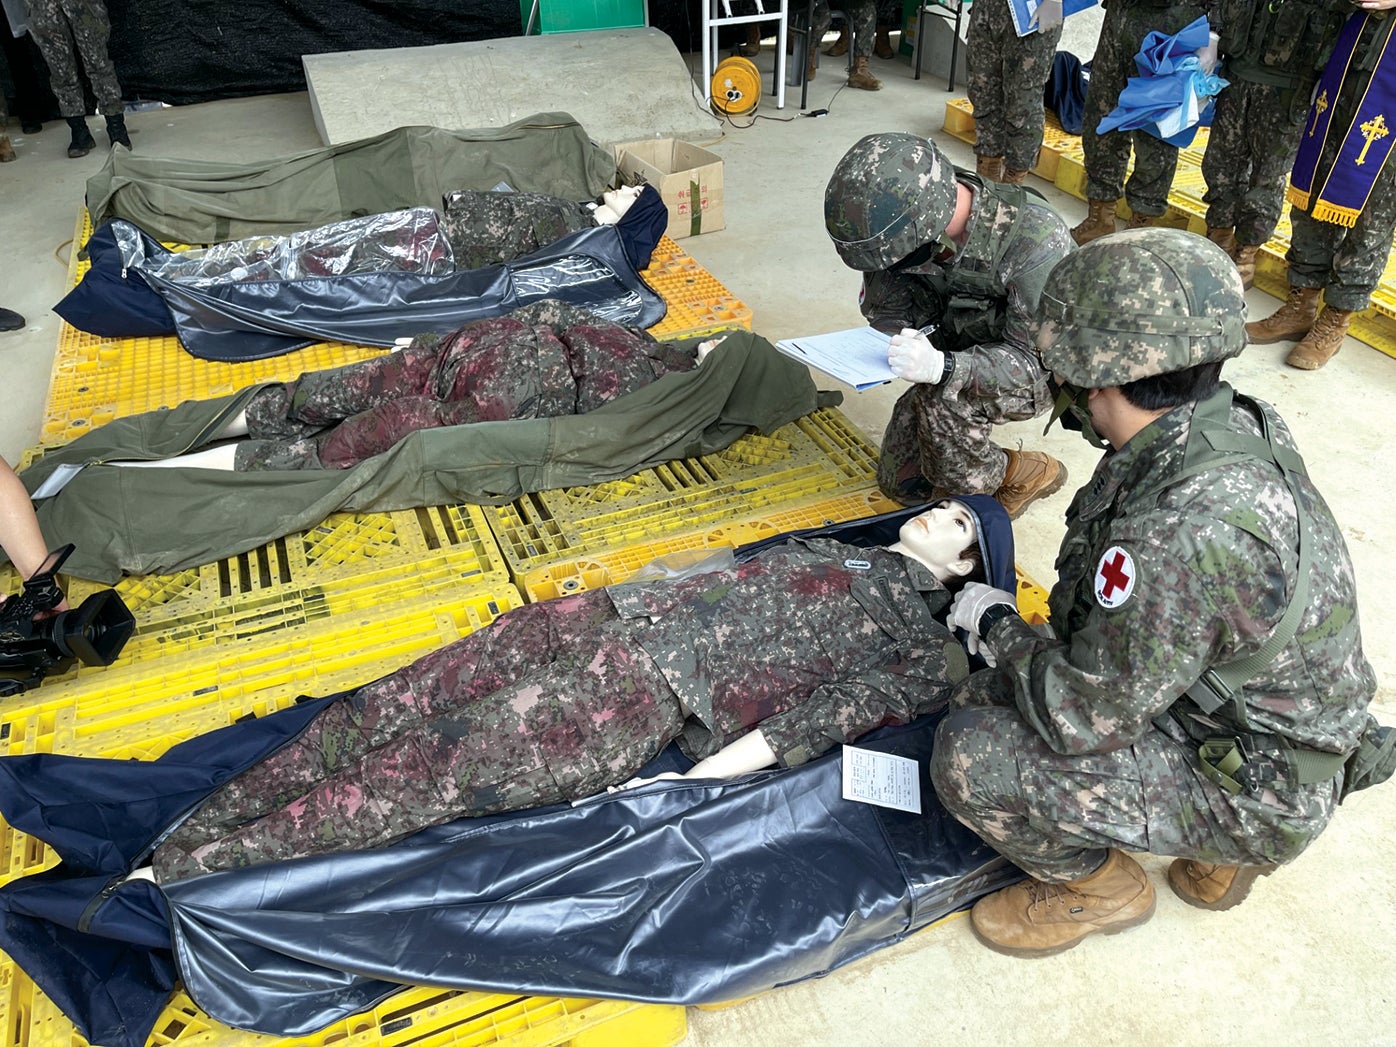 Soldiers from the 2nd Infantry Division Sustainment Brigade and their Republic of Korea Army counterparts conduct casualty recovery training in South Korea. (Credit: U.S. Army/1st Lt. Alexander Yang)